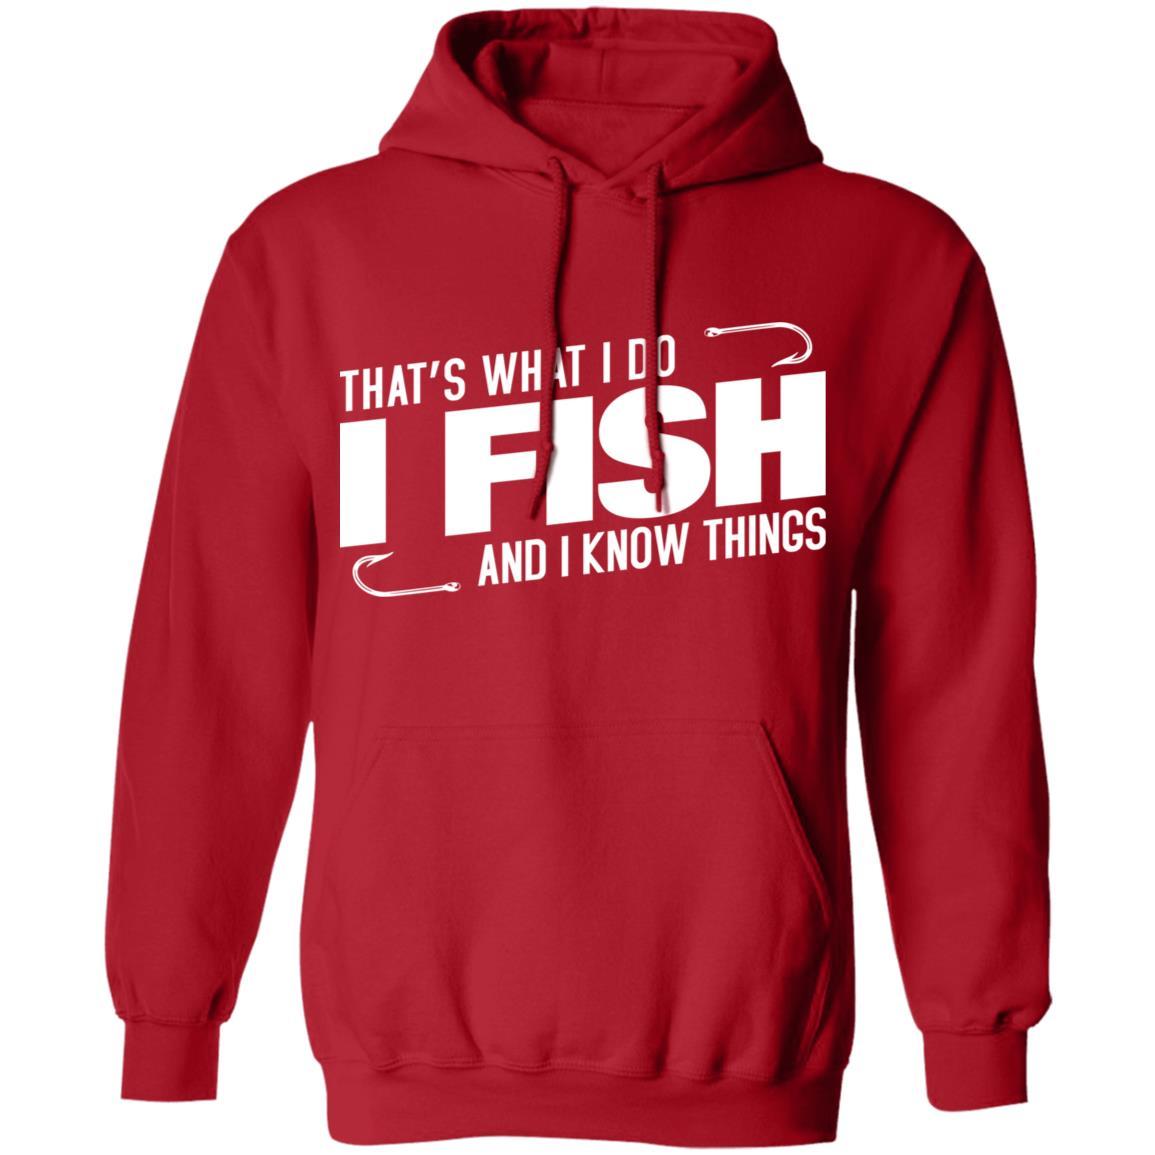 That's what i do i fish and i know things hoodie i red